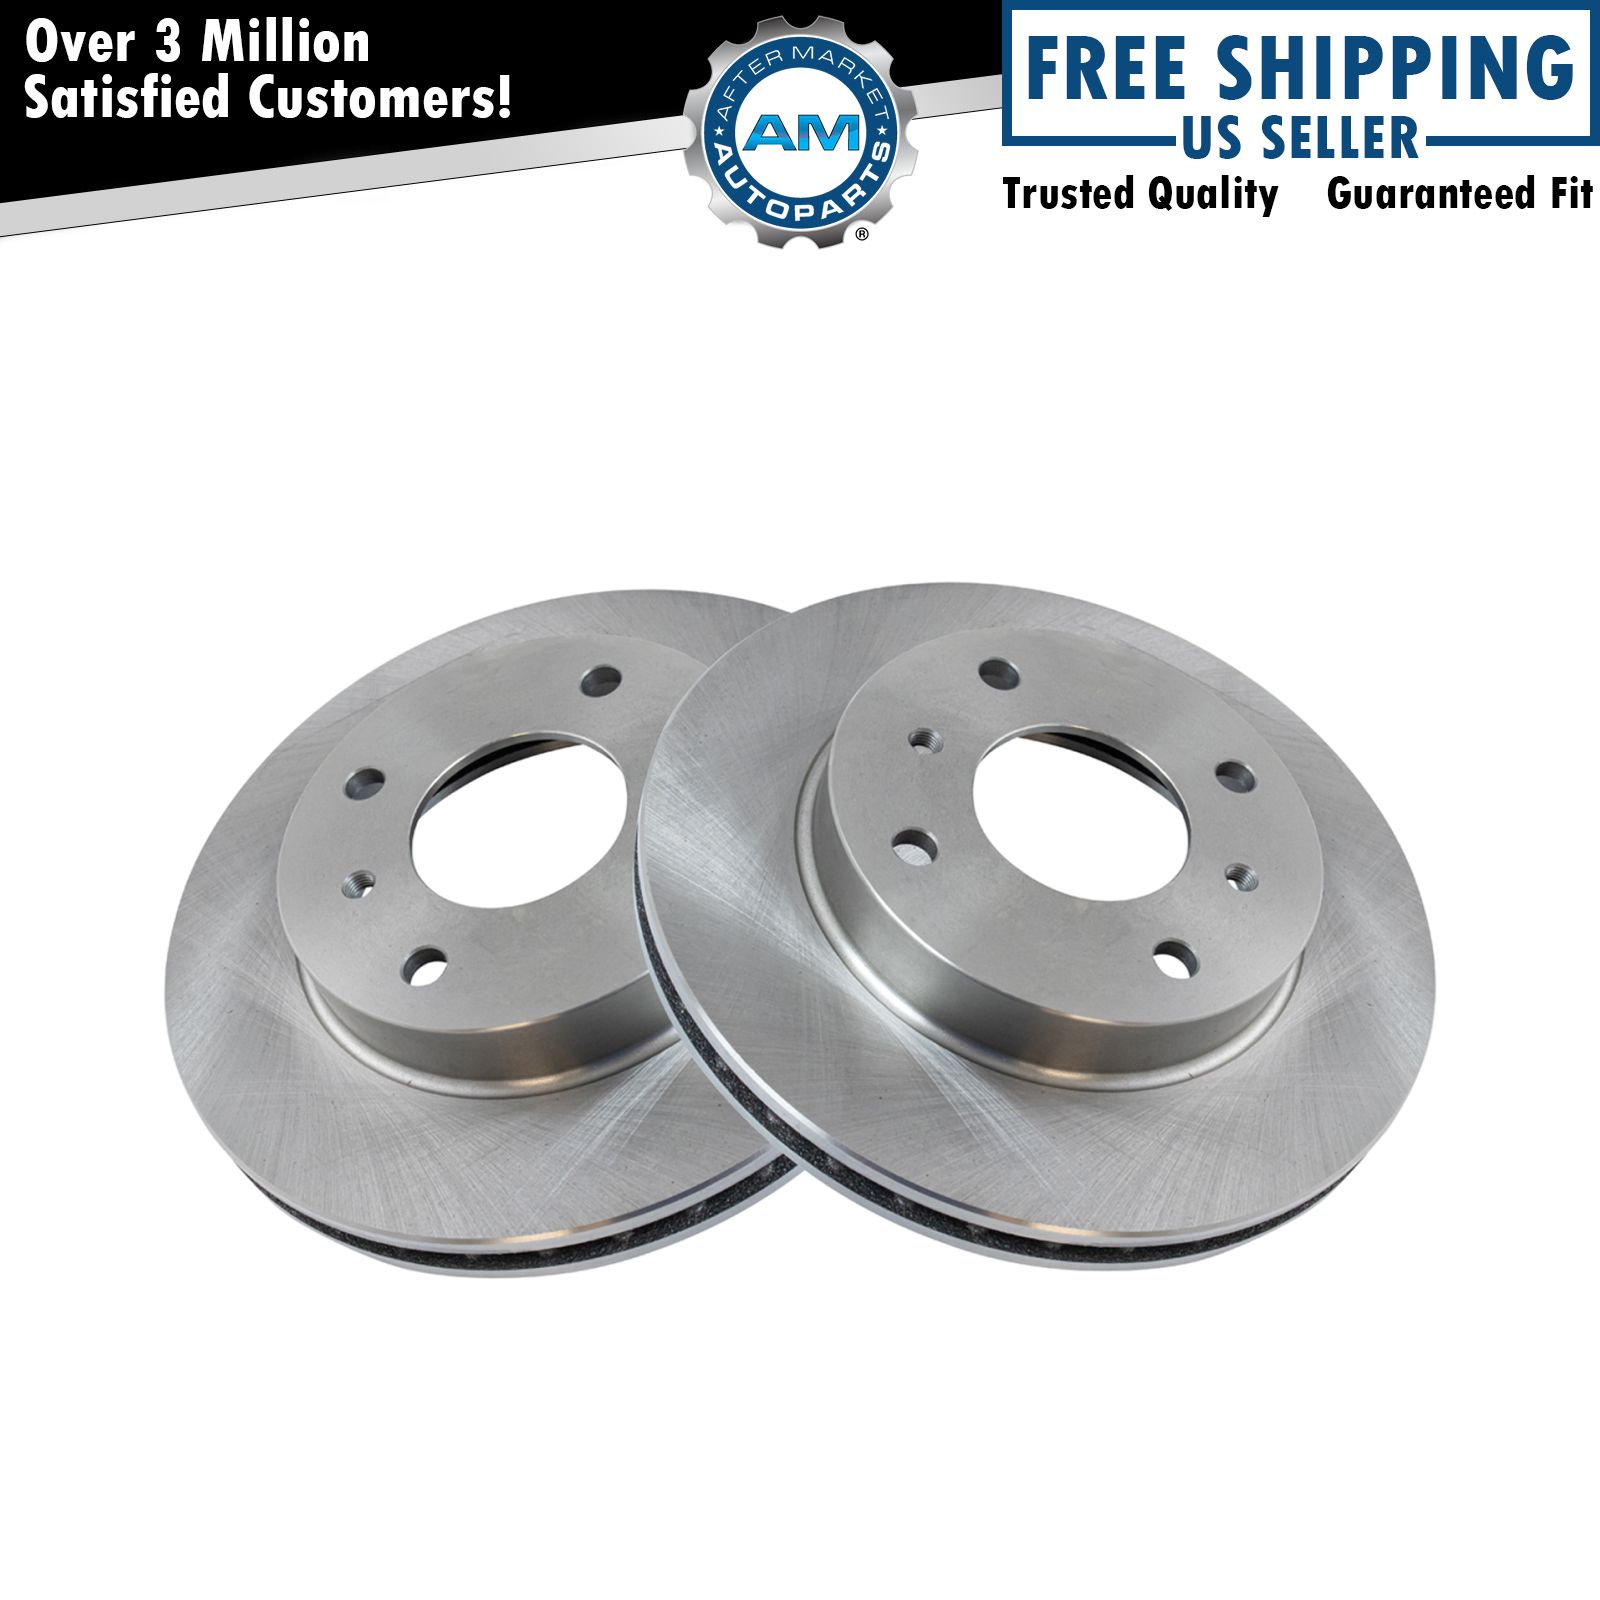 4 Stud Front Brake Rotor Pair Set for Nissan 240SX Sentra Stanza G20